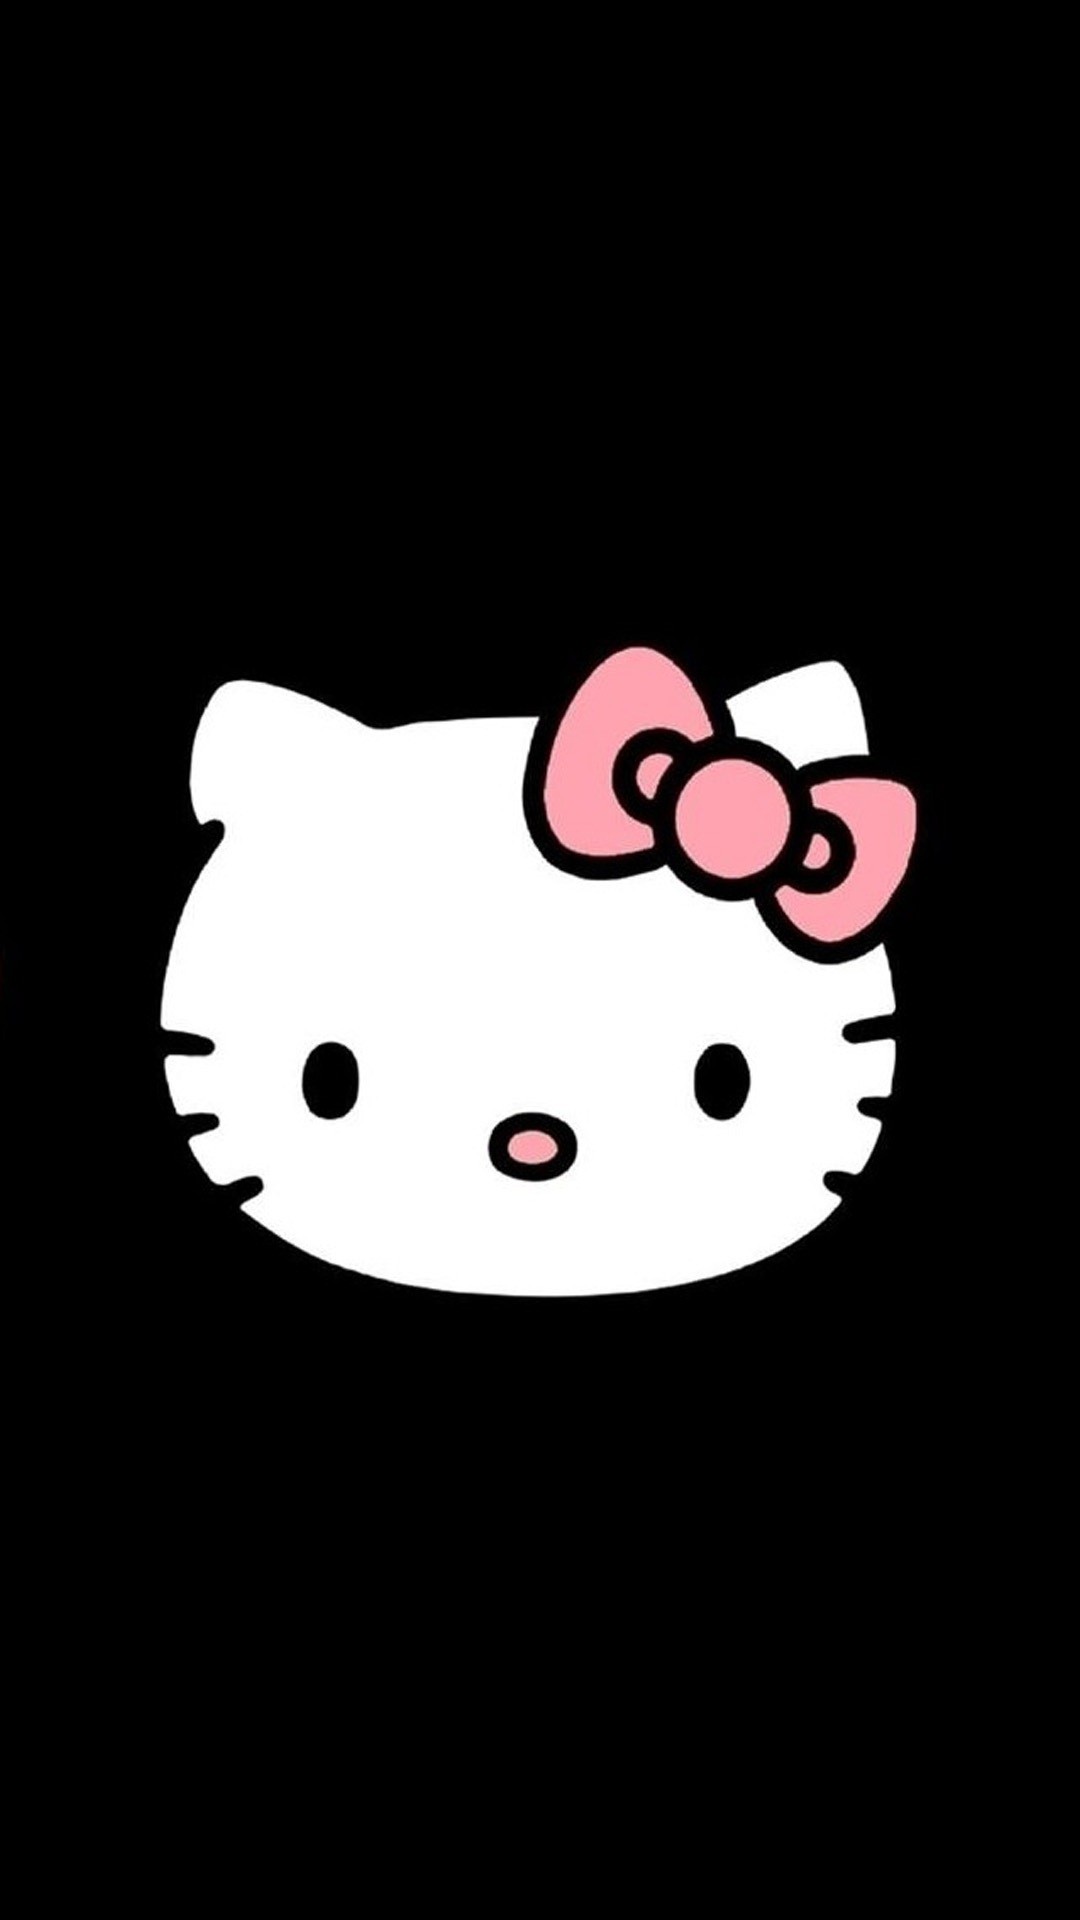 1080x1920 45+ Free HD Quality Cute iphone Wallpapers Background Images .